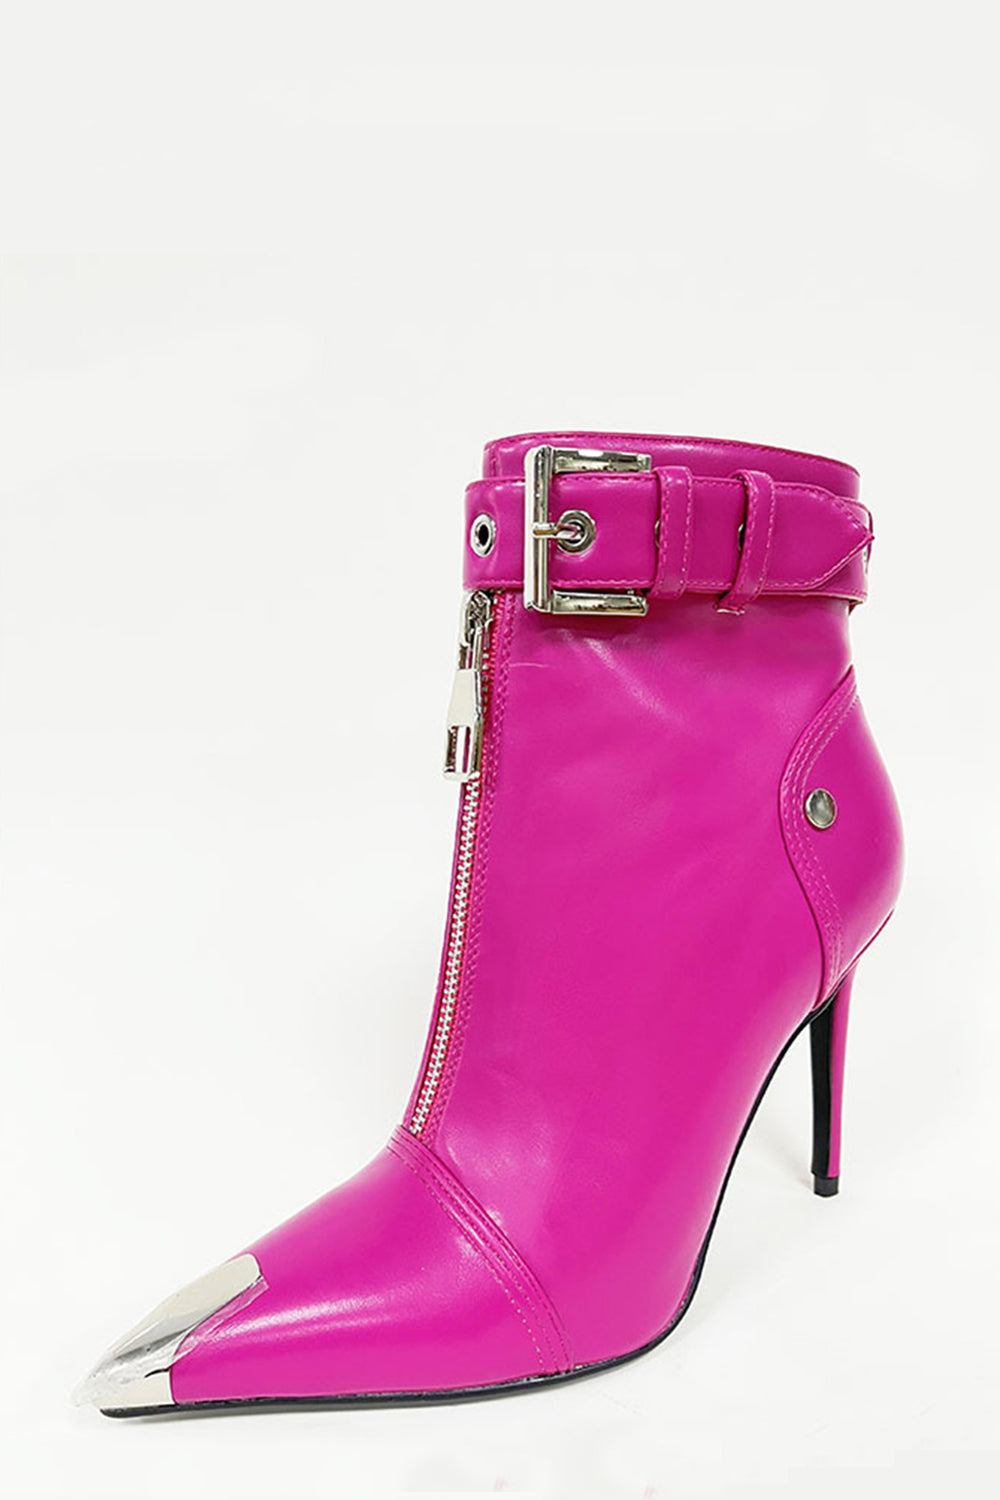 Faux Leather Buckled Eyelet Front Zip Ankle Boots - Hot Pink